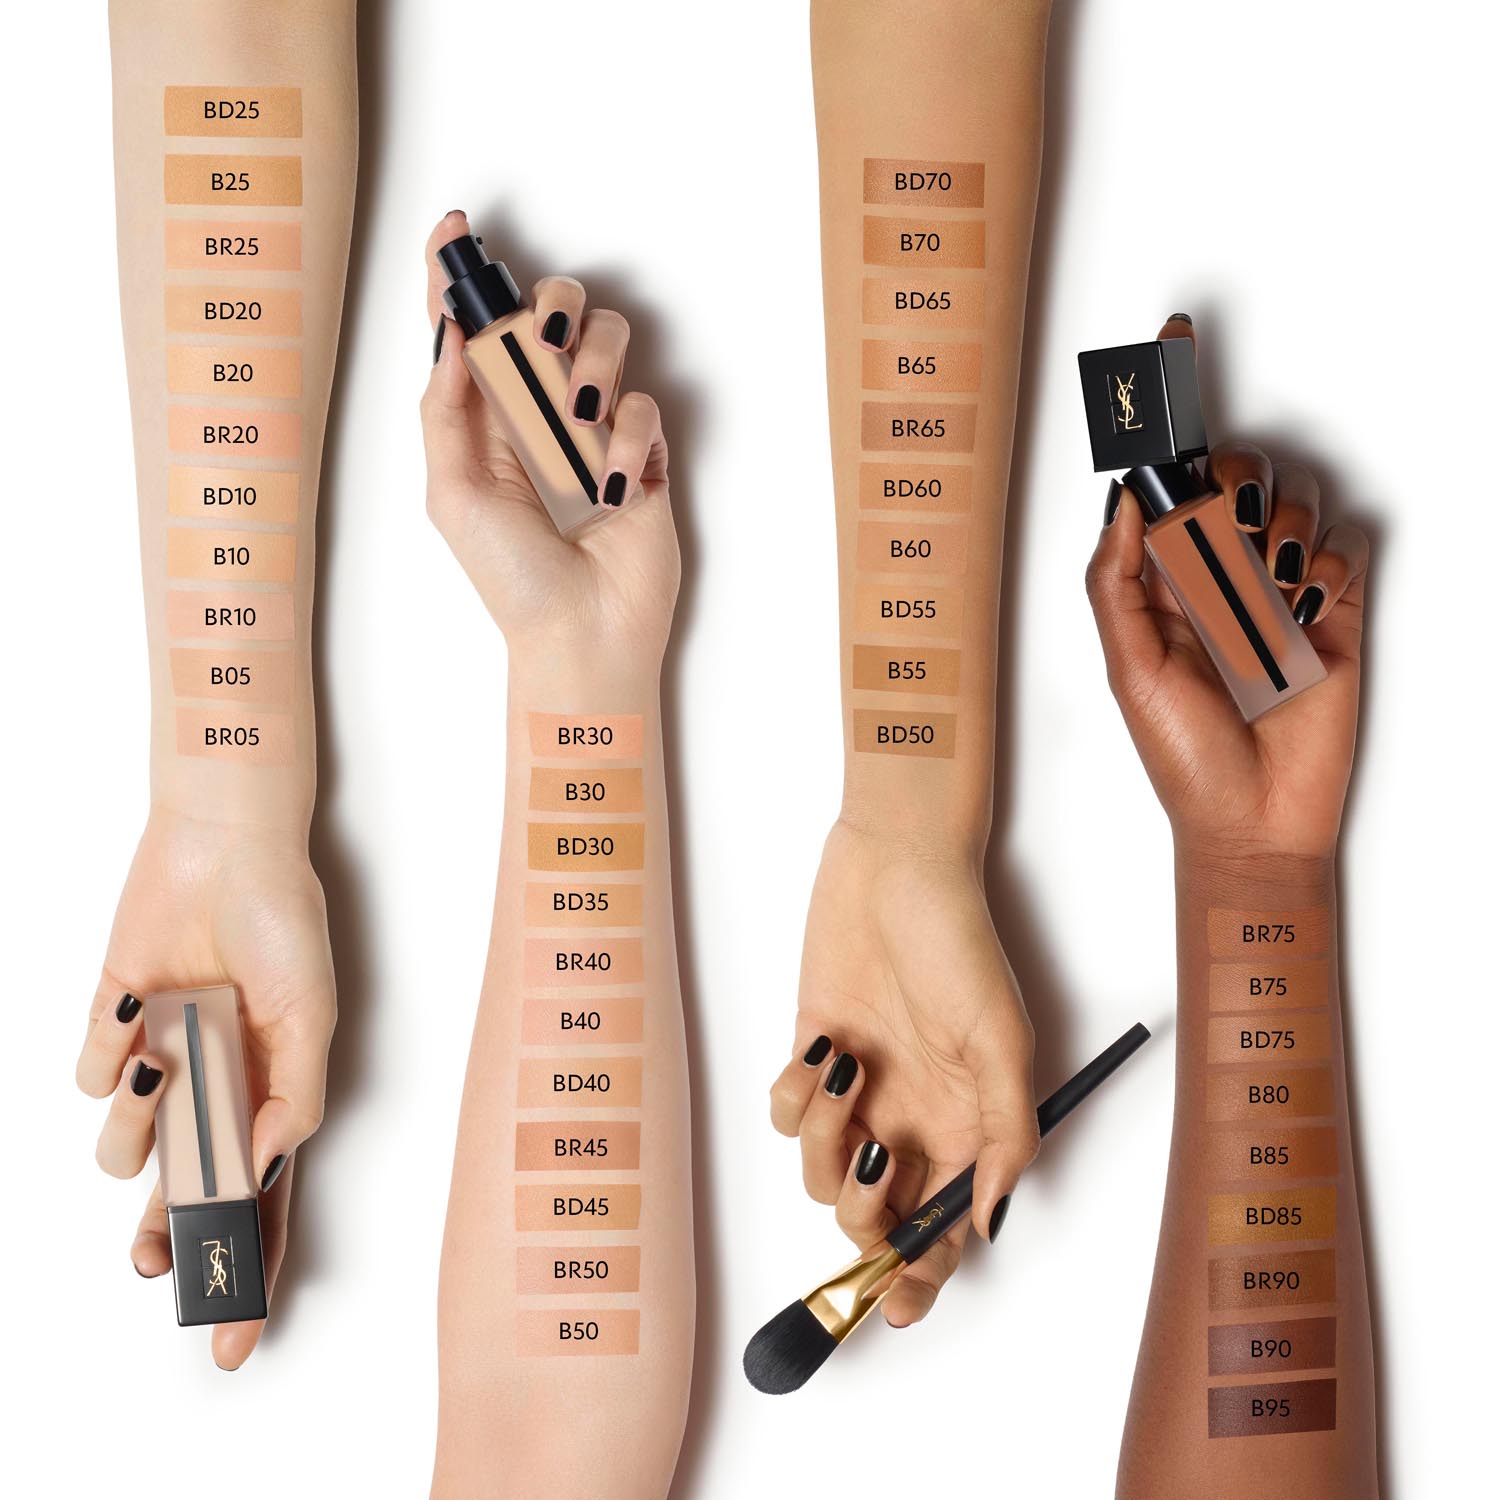 YSL Encre de Peau All Hours Foundation Swatches Shades Colors welche Farbe